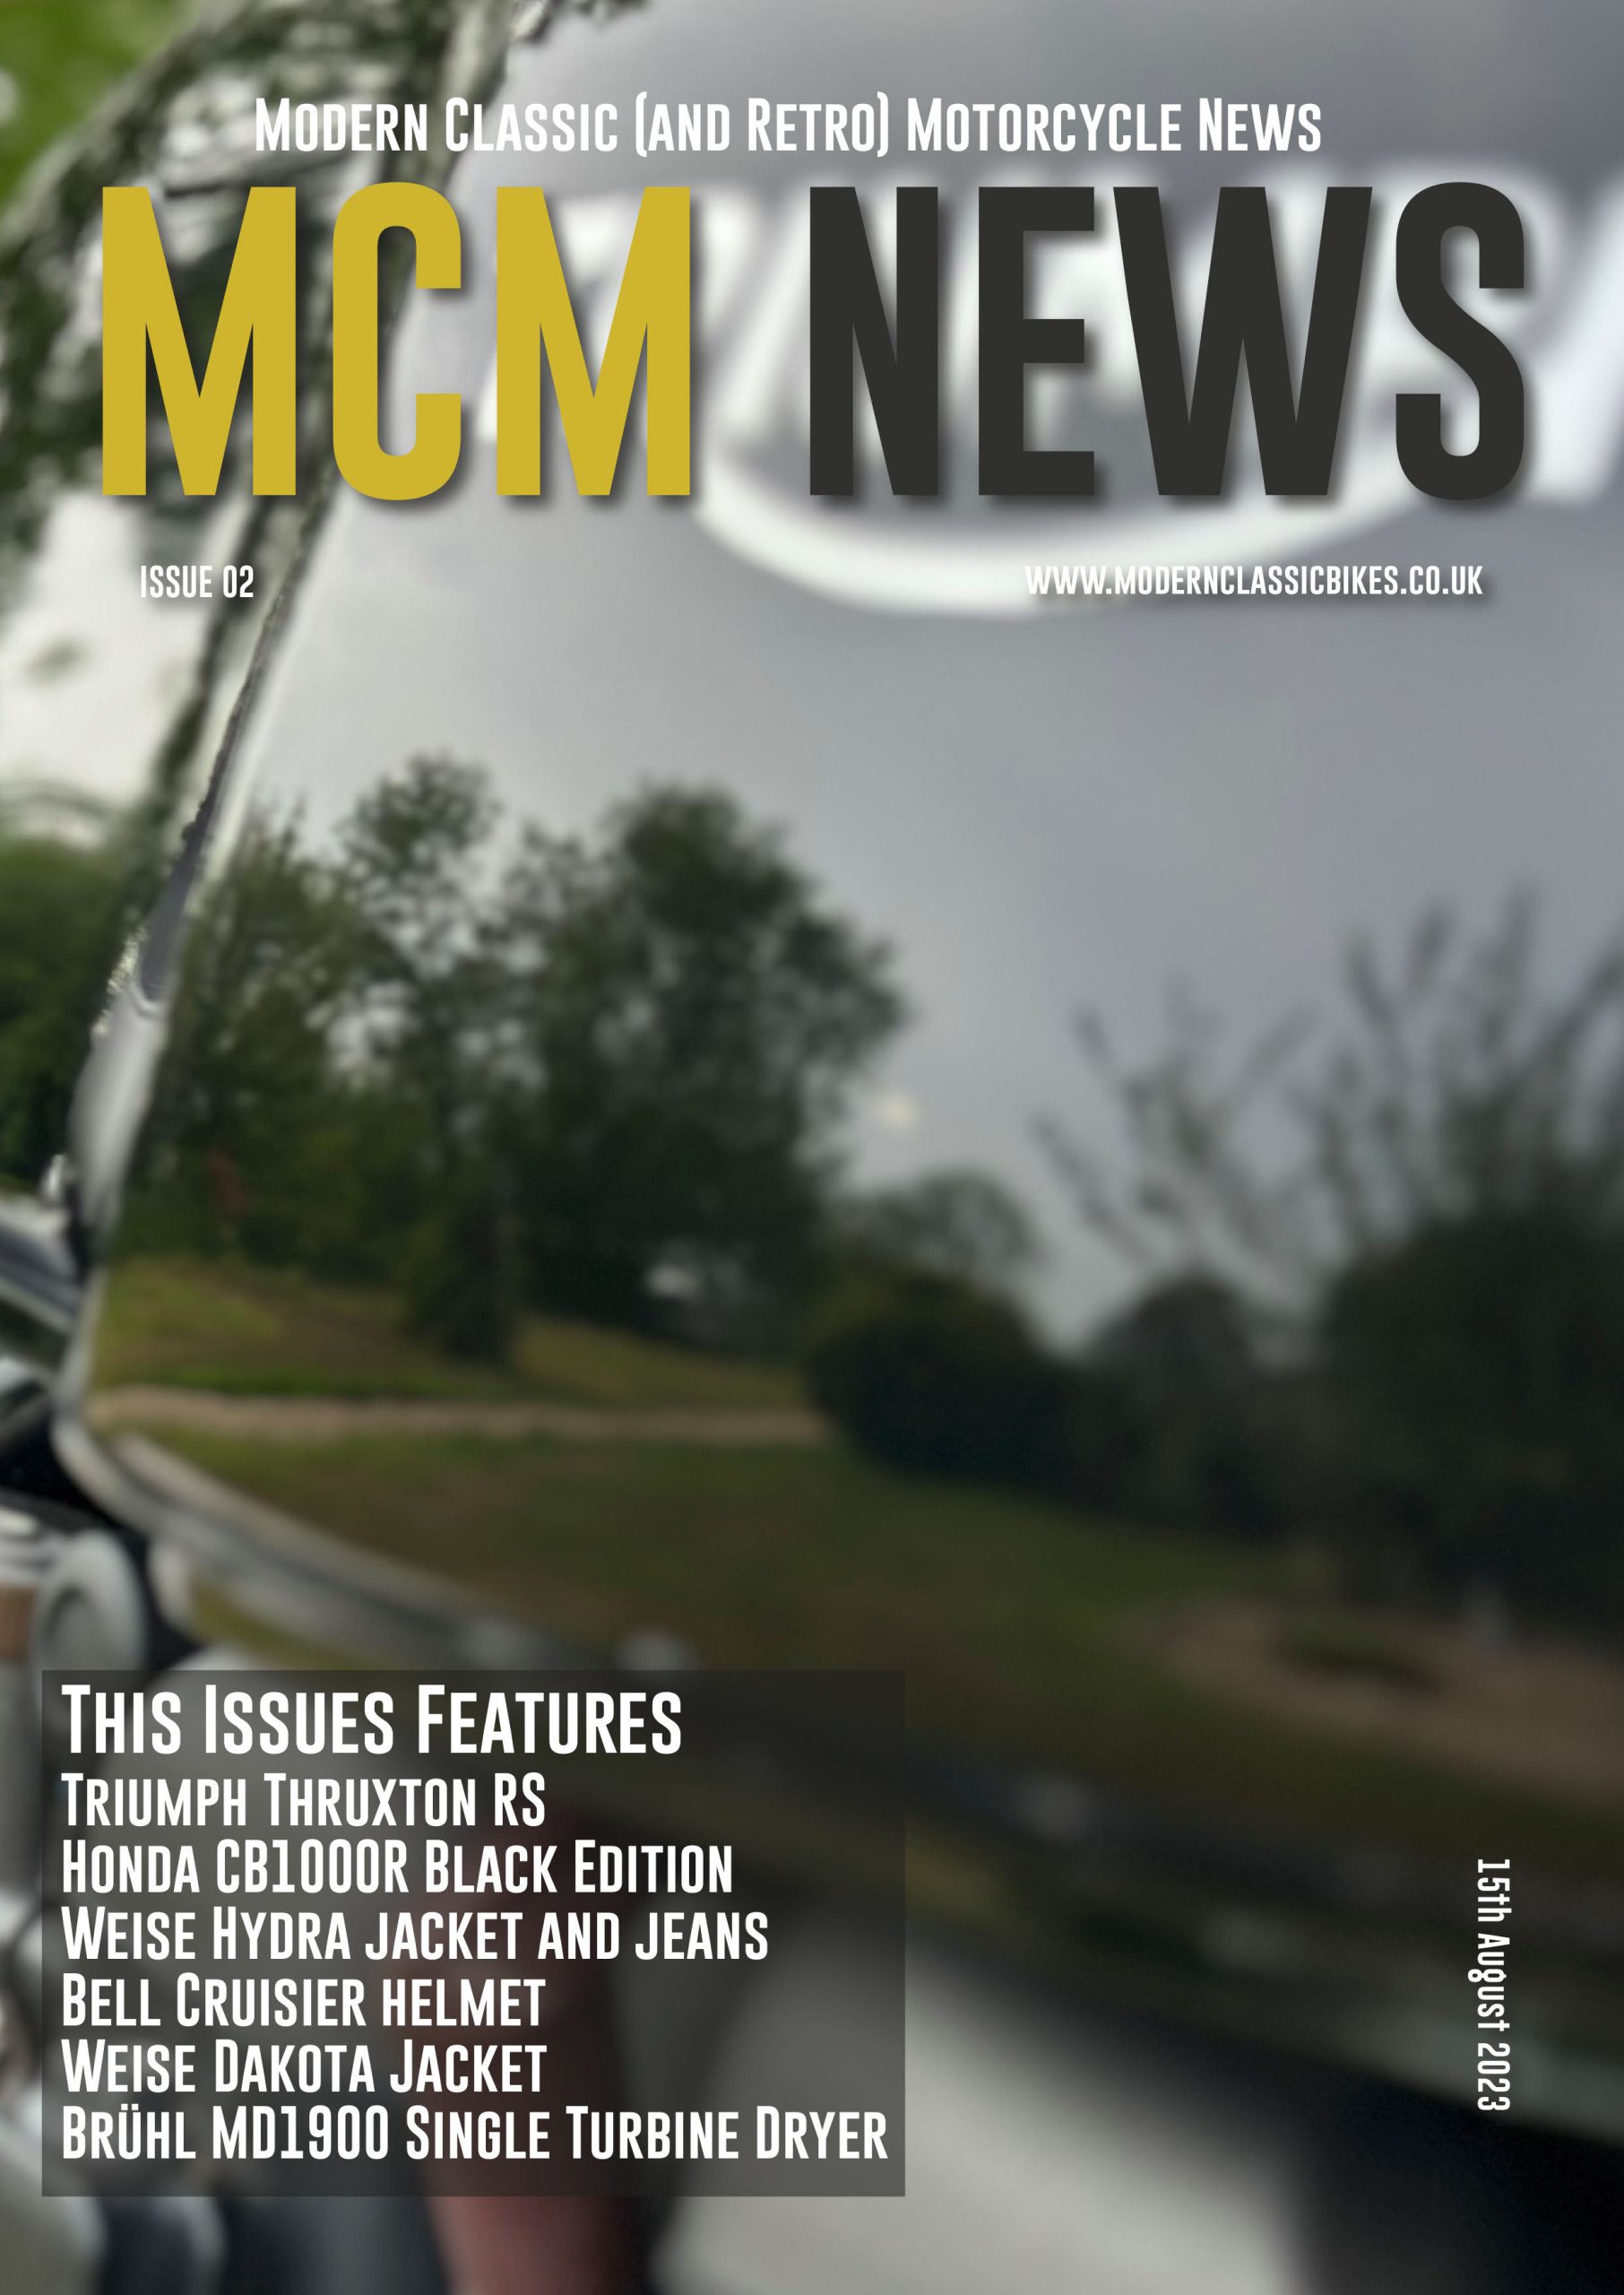 Modern Classic Motorcycle News Magazine – Issue 2